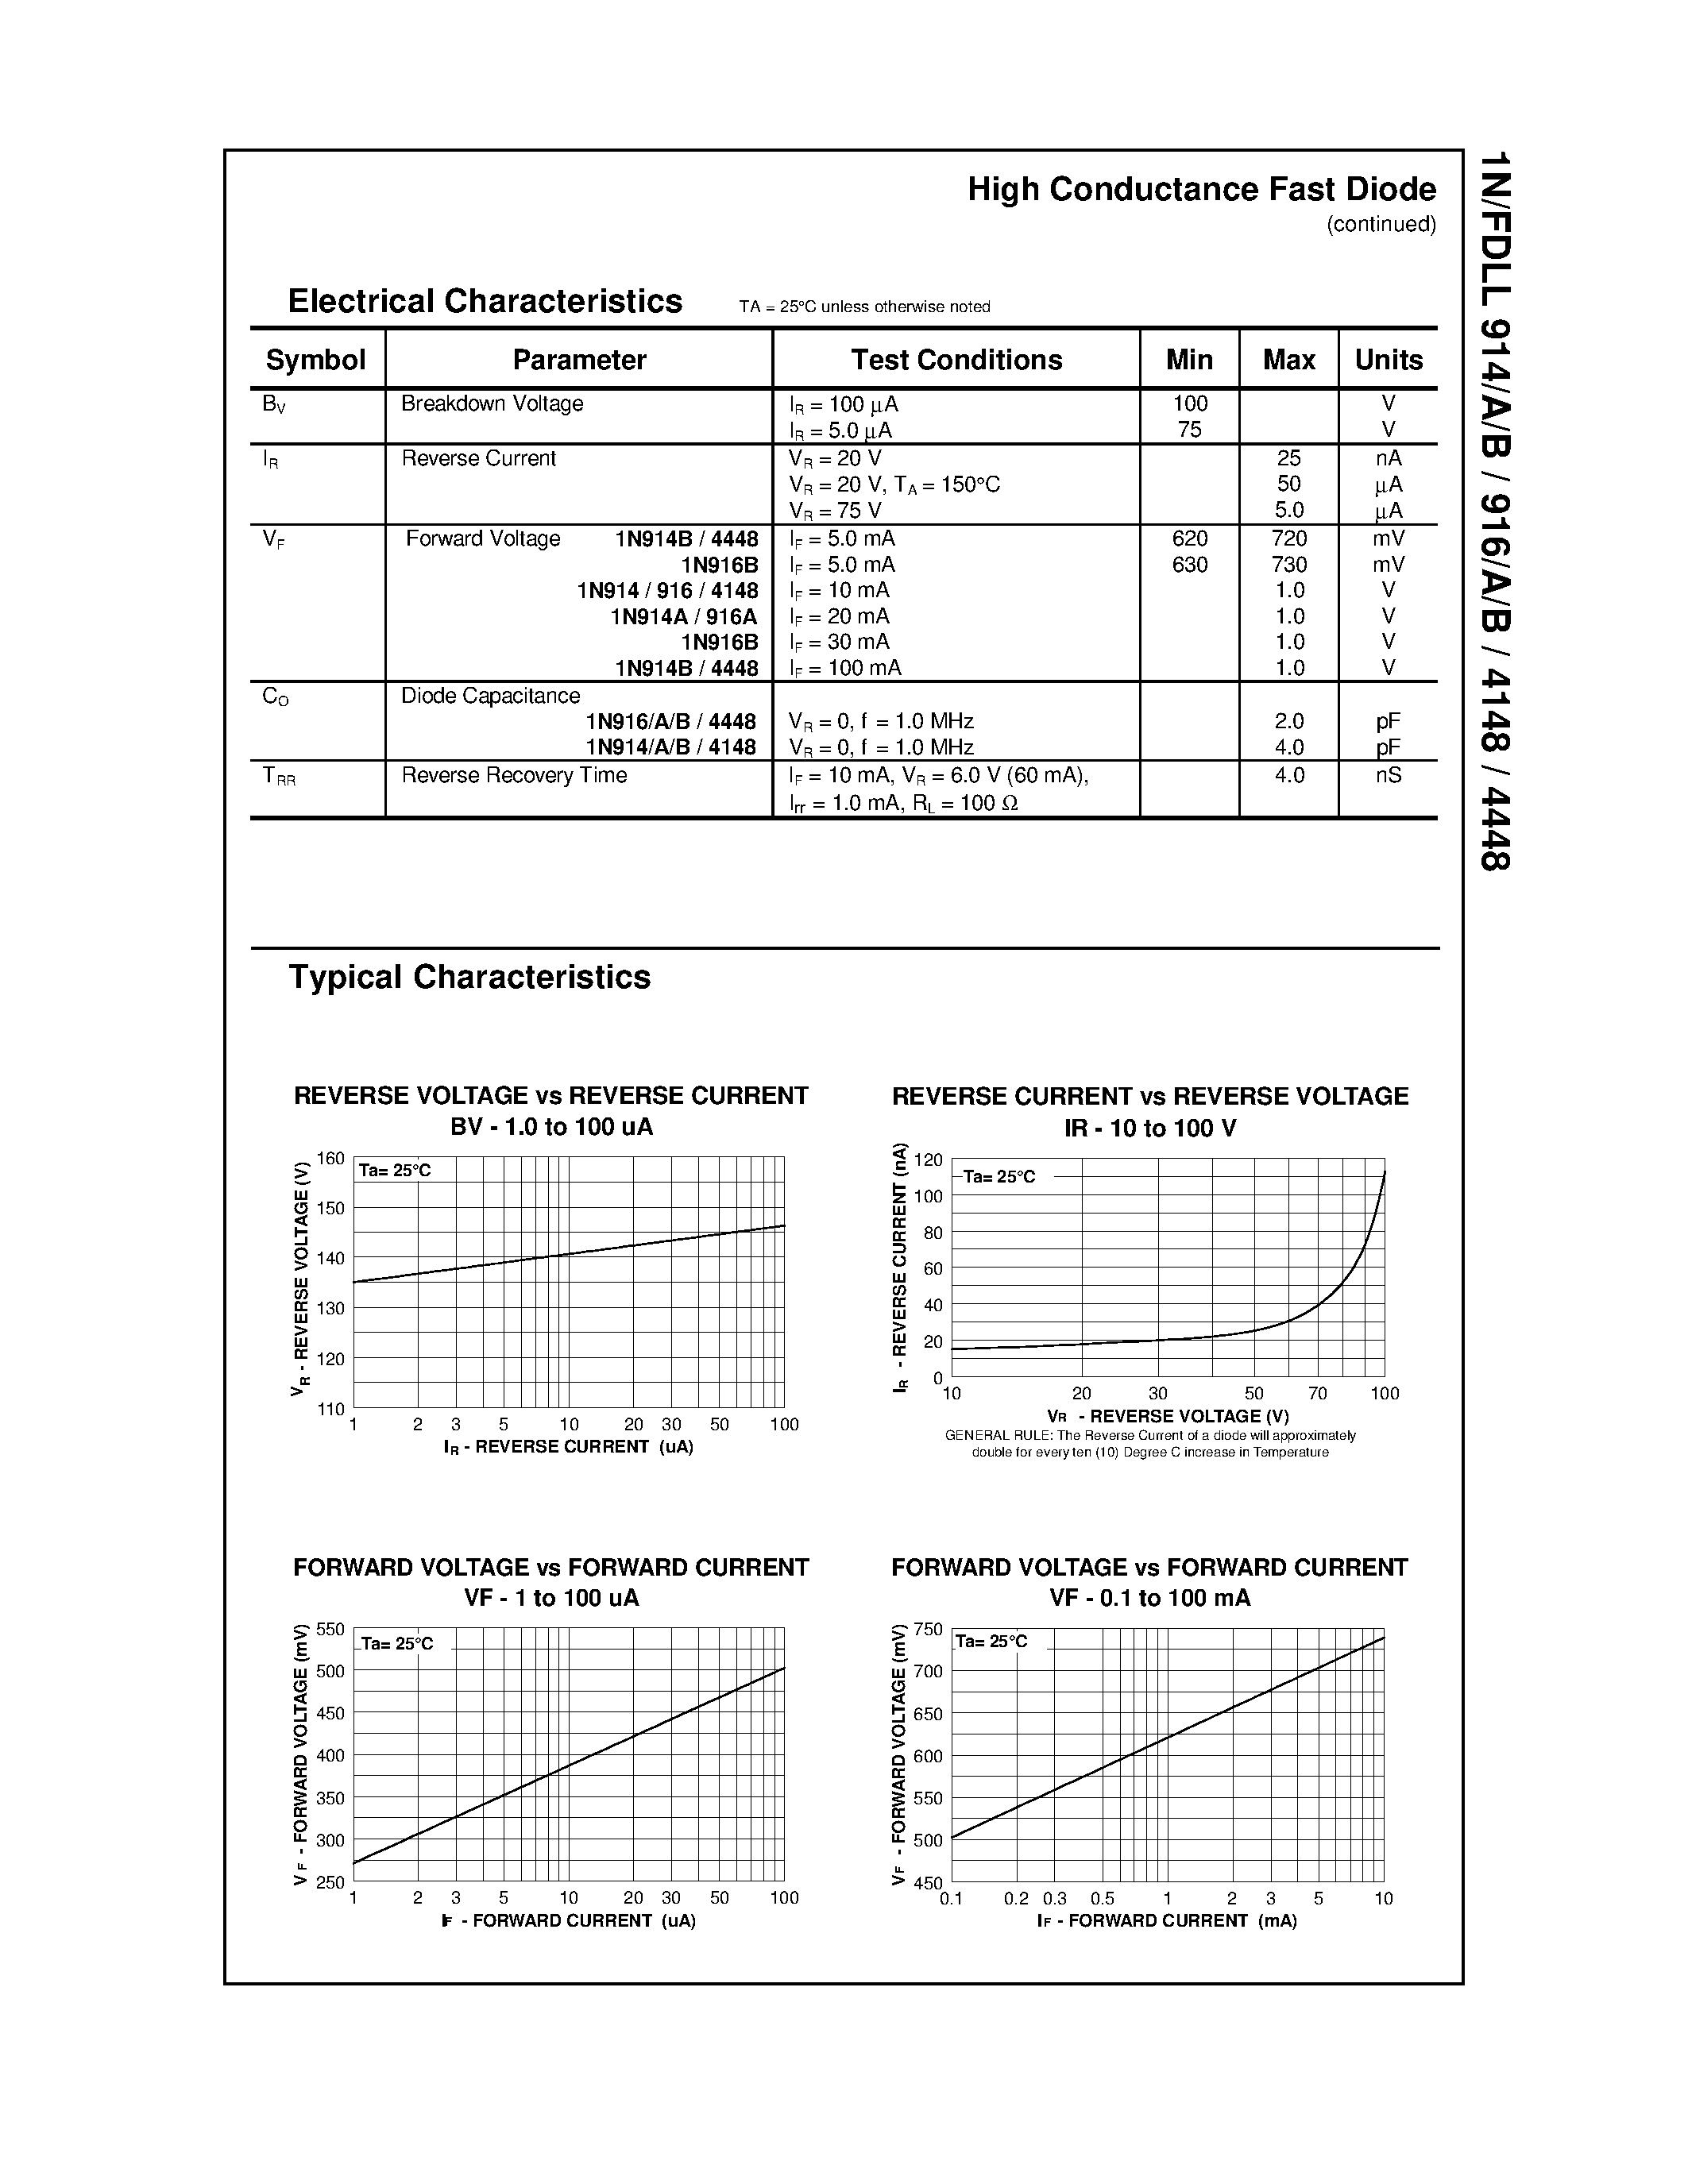 Datasheet FDLL4148 - High Conductance Fast Diode page 2